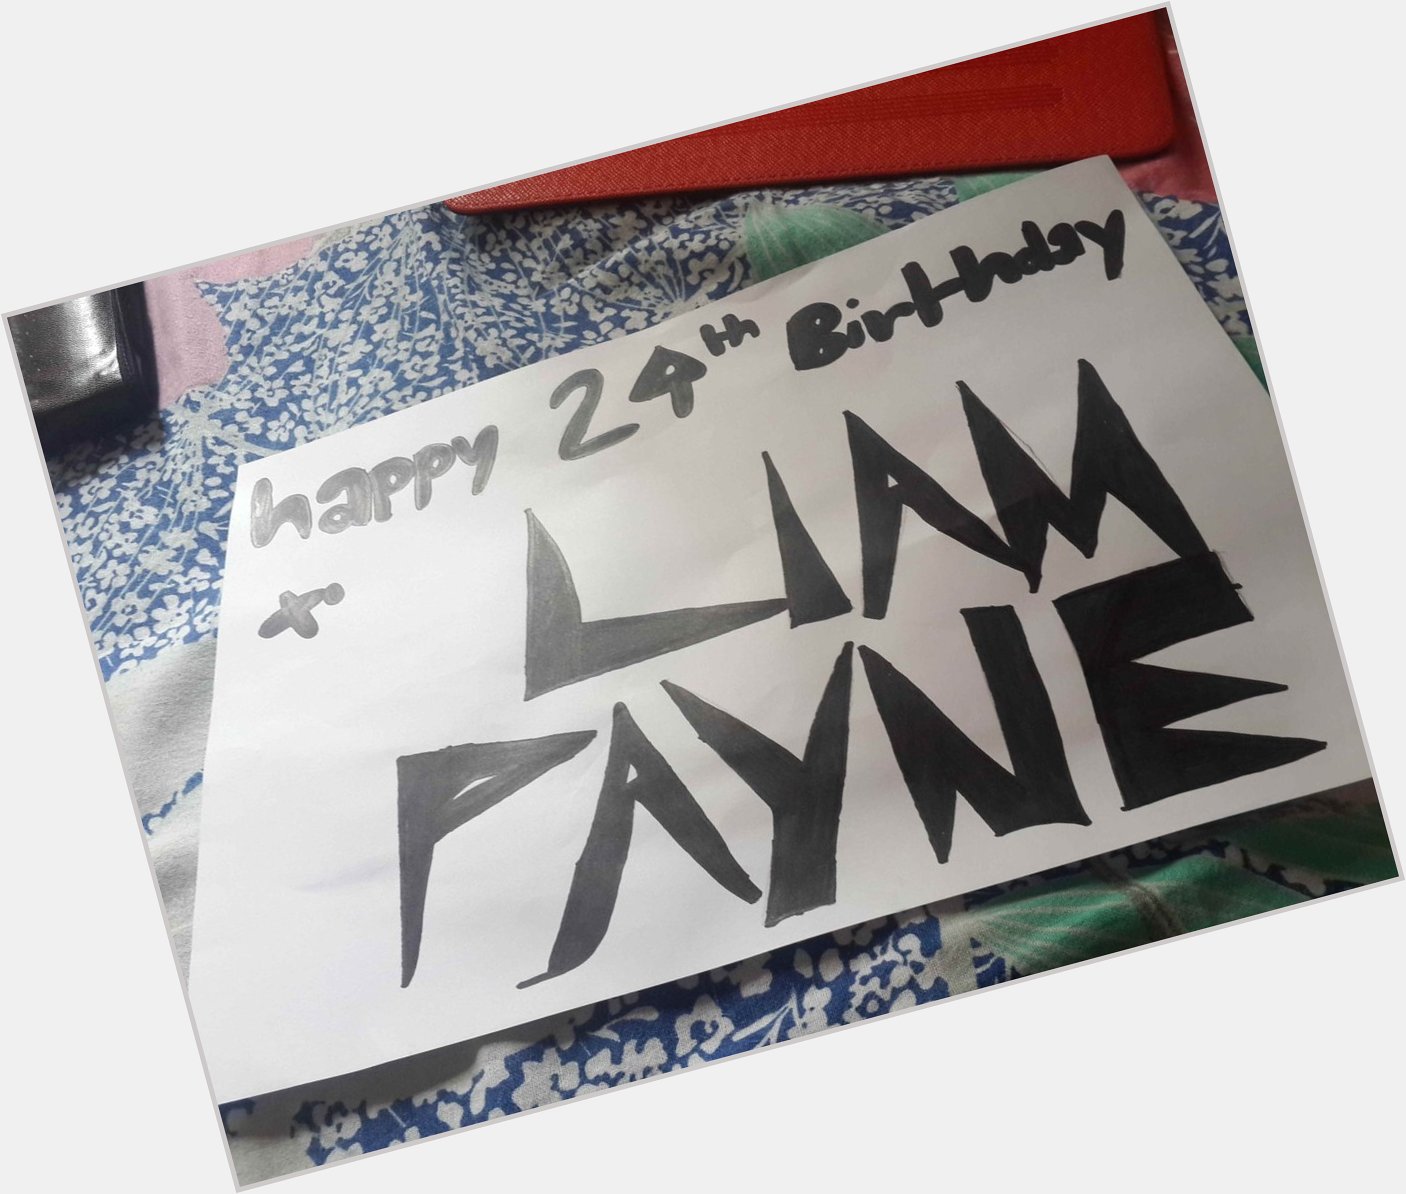  payne 
Happy birthday Liam. All the luv from Bangladesh. I am 10 YRS and a huge fan of yours. 